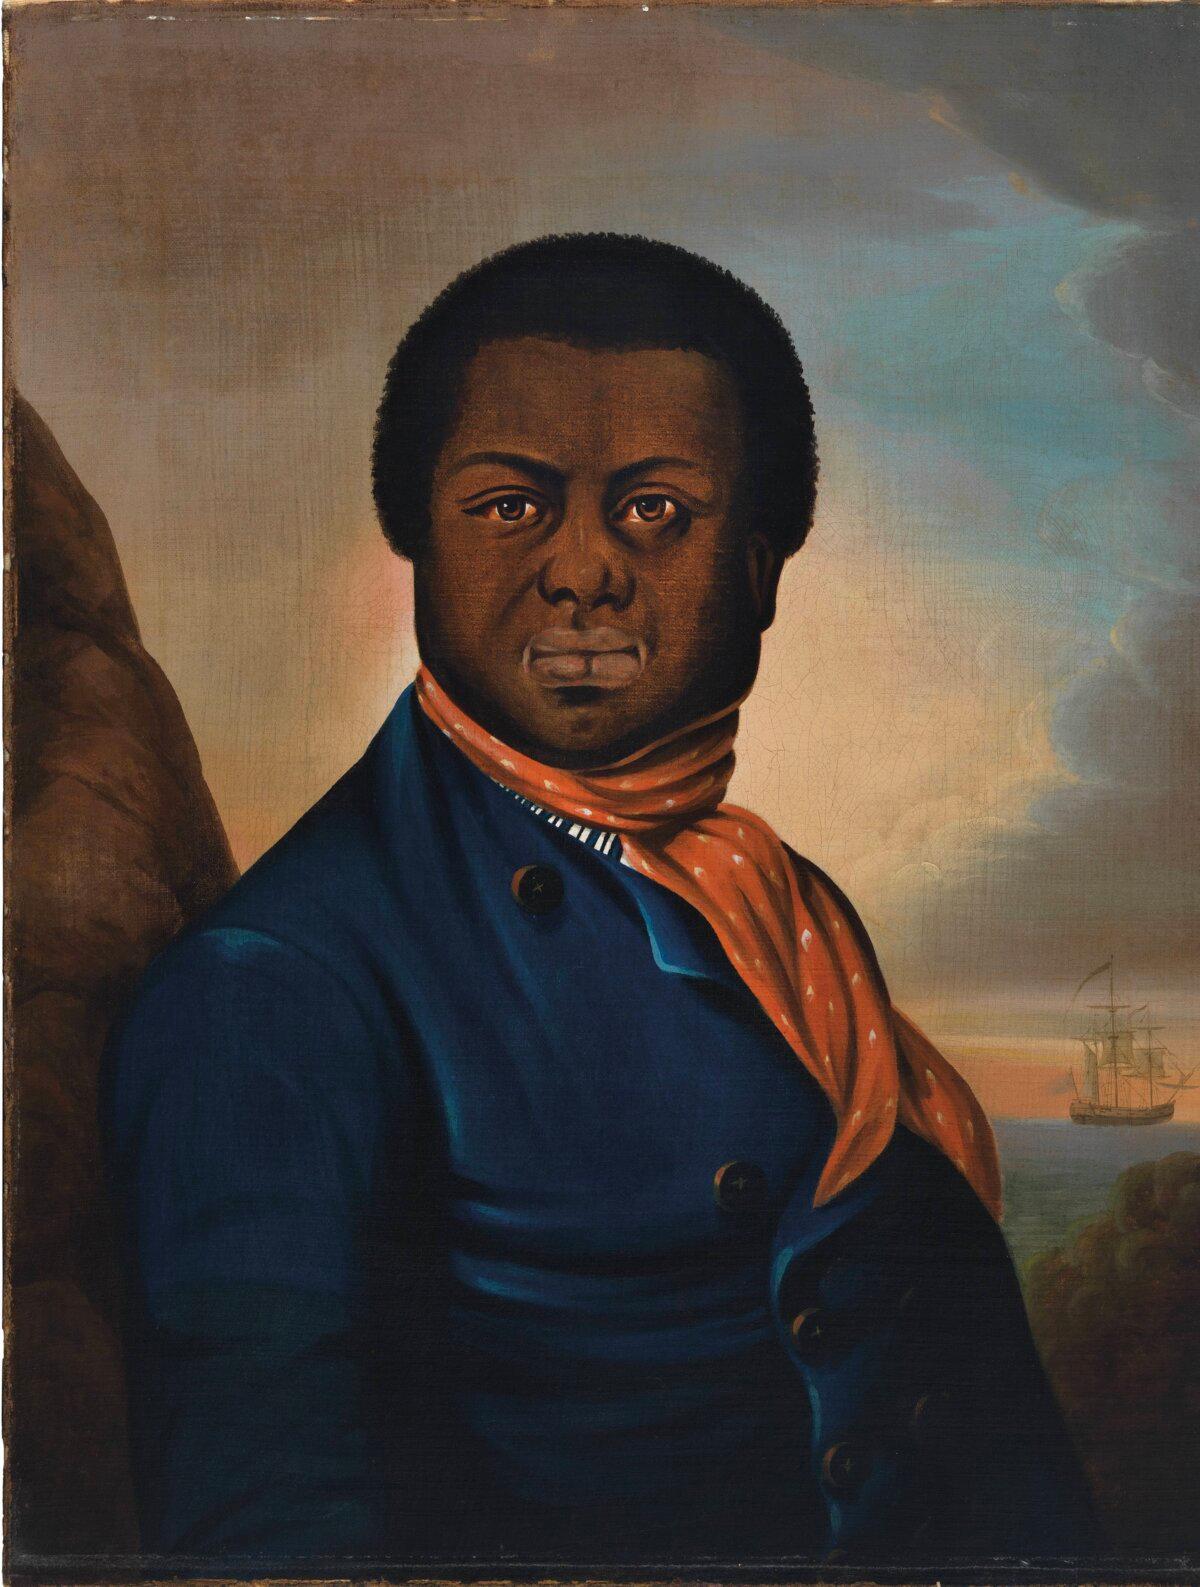 A portrait believed to be of Paul Cuffe by an American artist, circa 1800. Oil on canvas. Los Angeles County Museum of Art. (Los Angeles County Museum of Art)